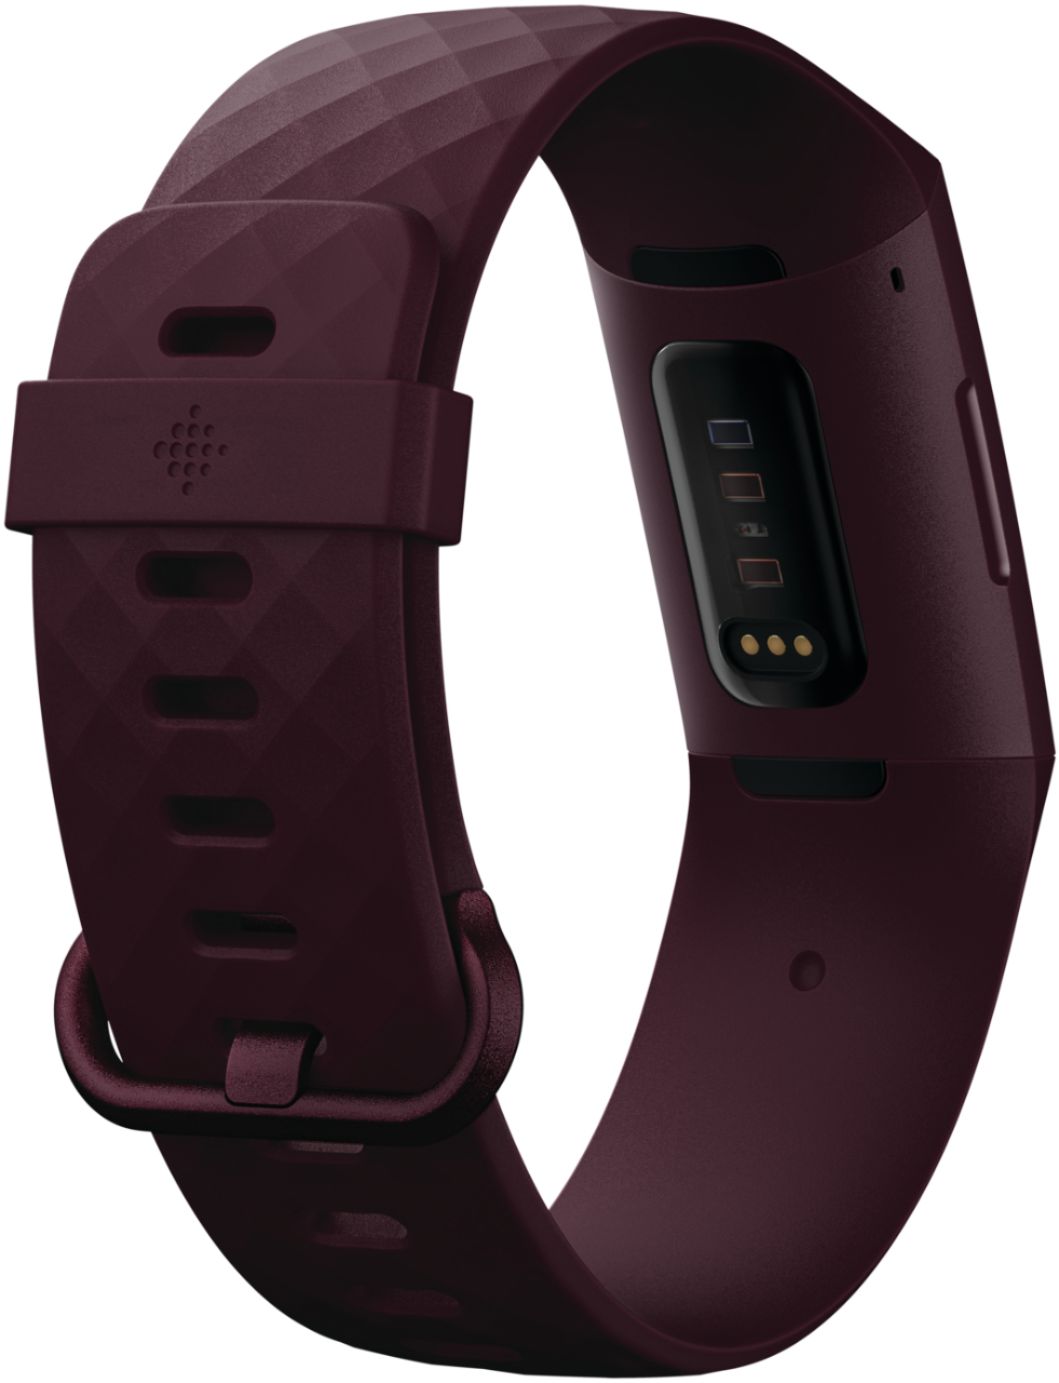 best buy charge 4 fitbit